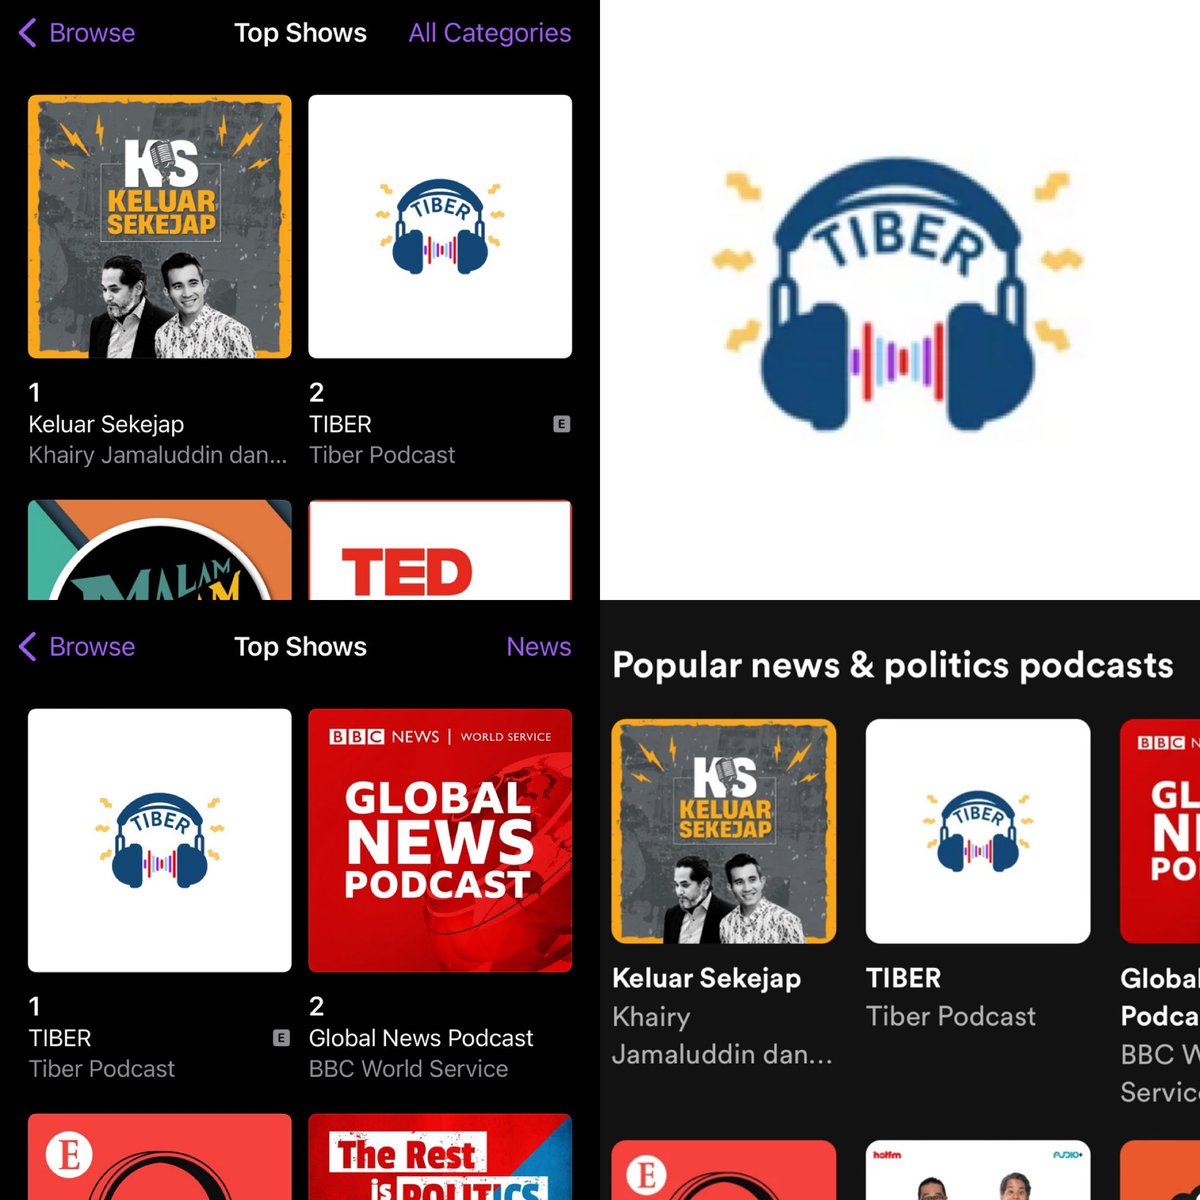 Humbled to announce that @TiberPodcast is the No 1 news podcast in Malaysia, on Apple podcast and on Spotify. We’re no 2 in overall podcast behind Keluar Sekejap. Thank you to you for this support. Let us know what you want us to talk about next.